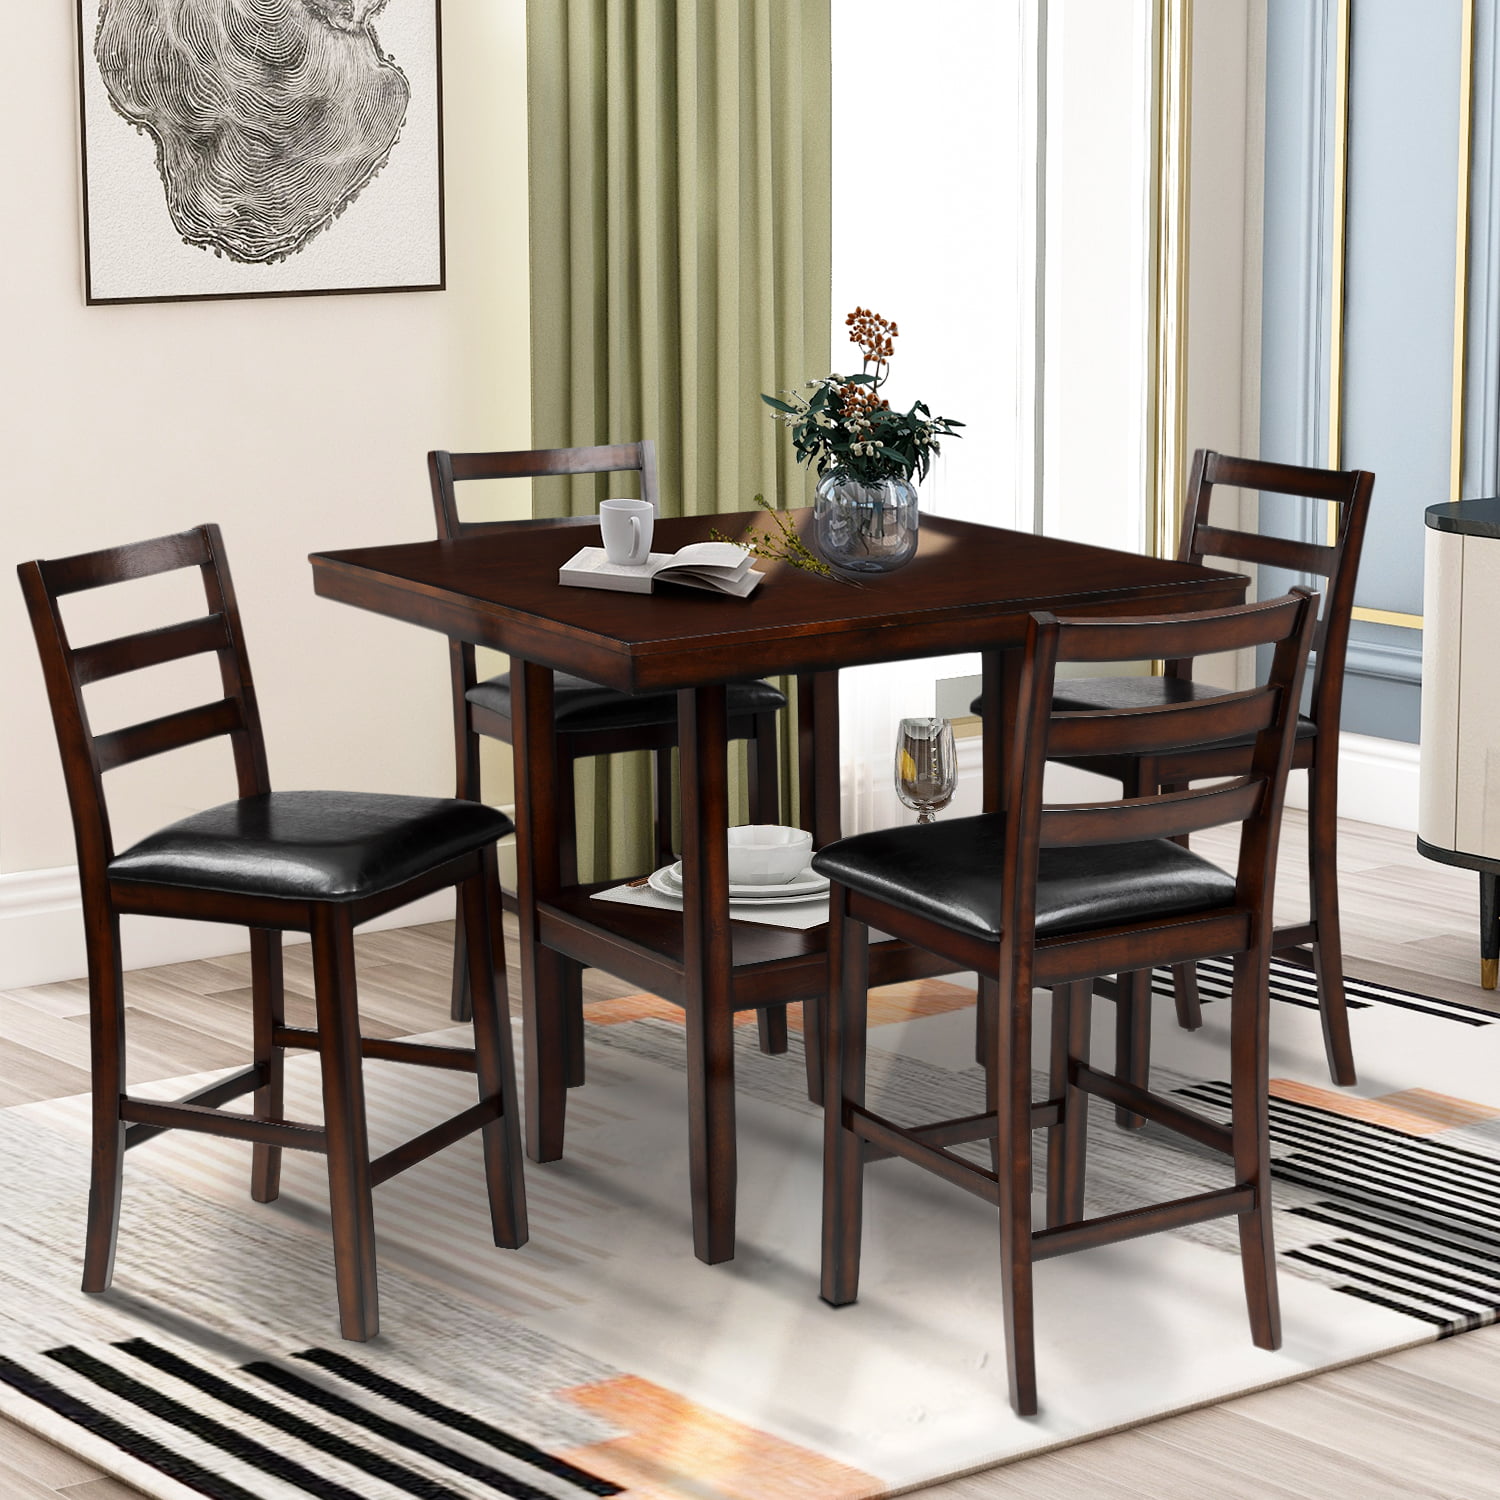 5 Piece Square Counter Height Dining Table Set, Kitchen Dining Room